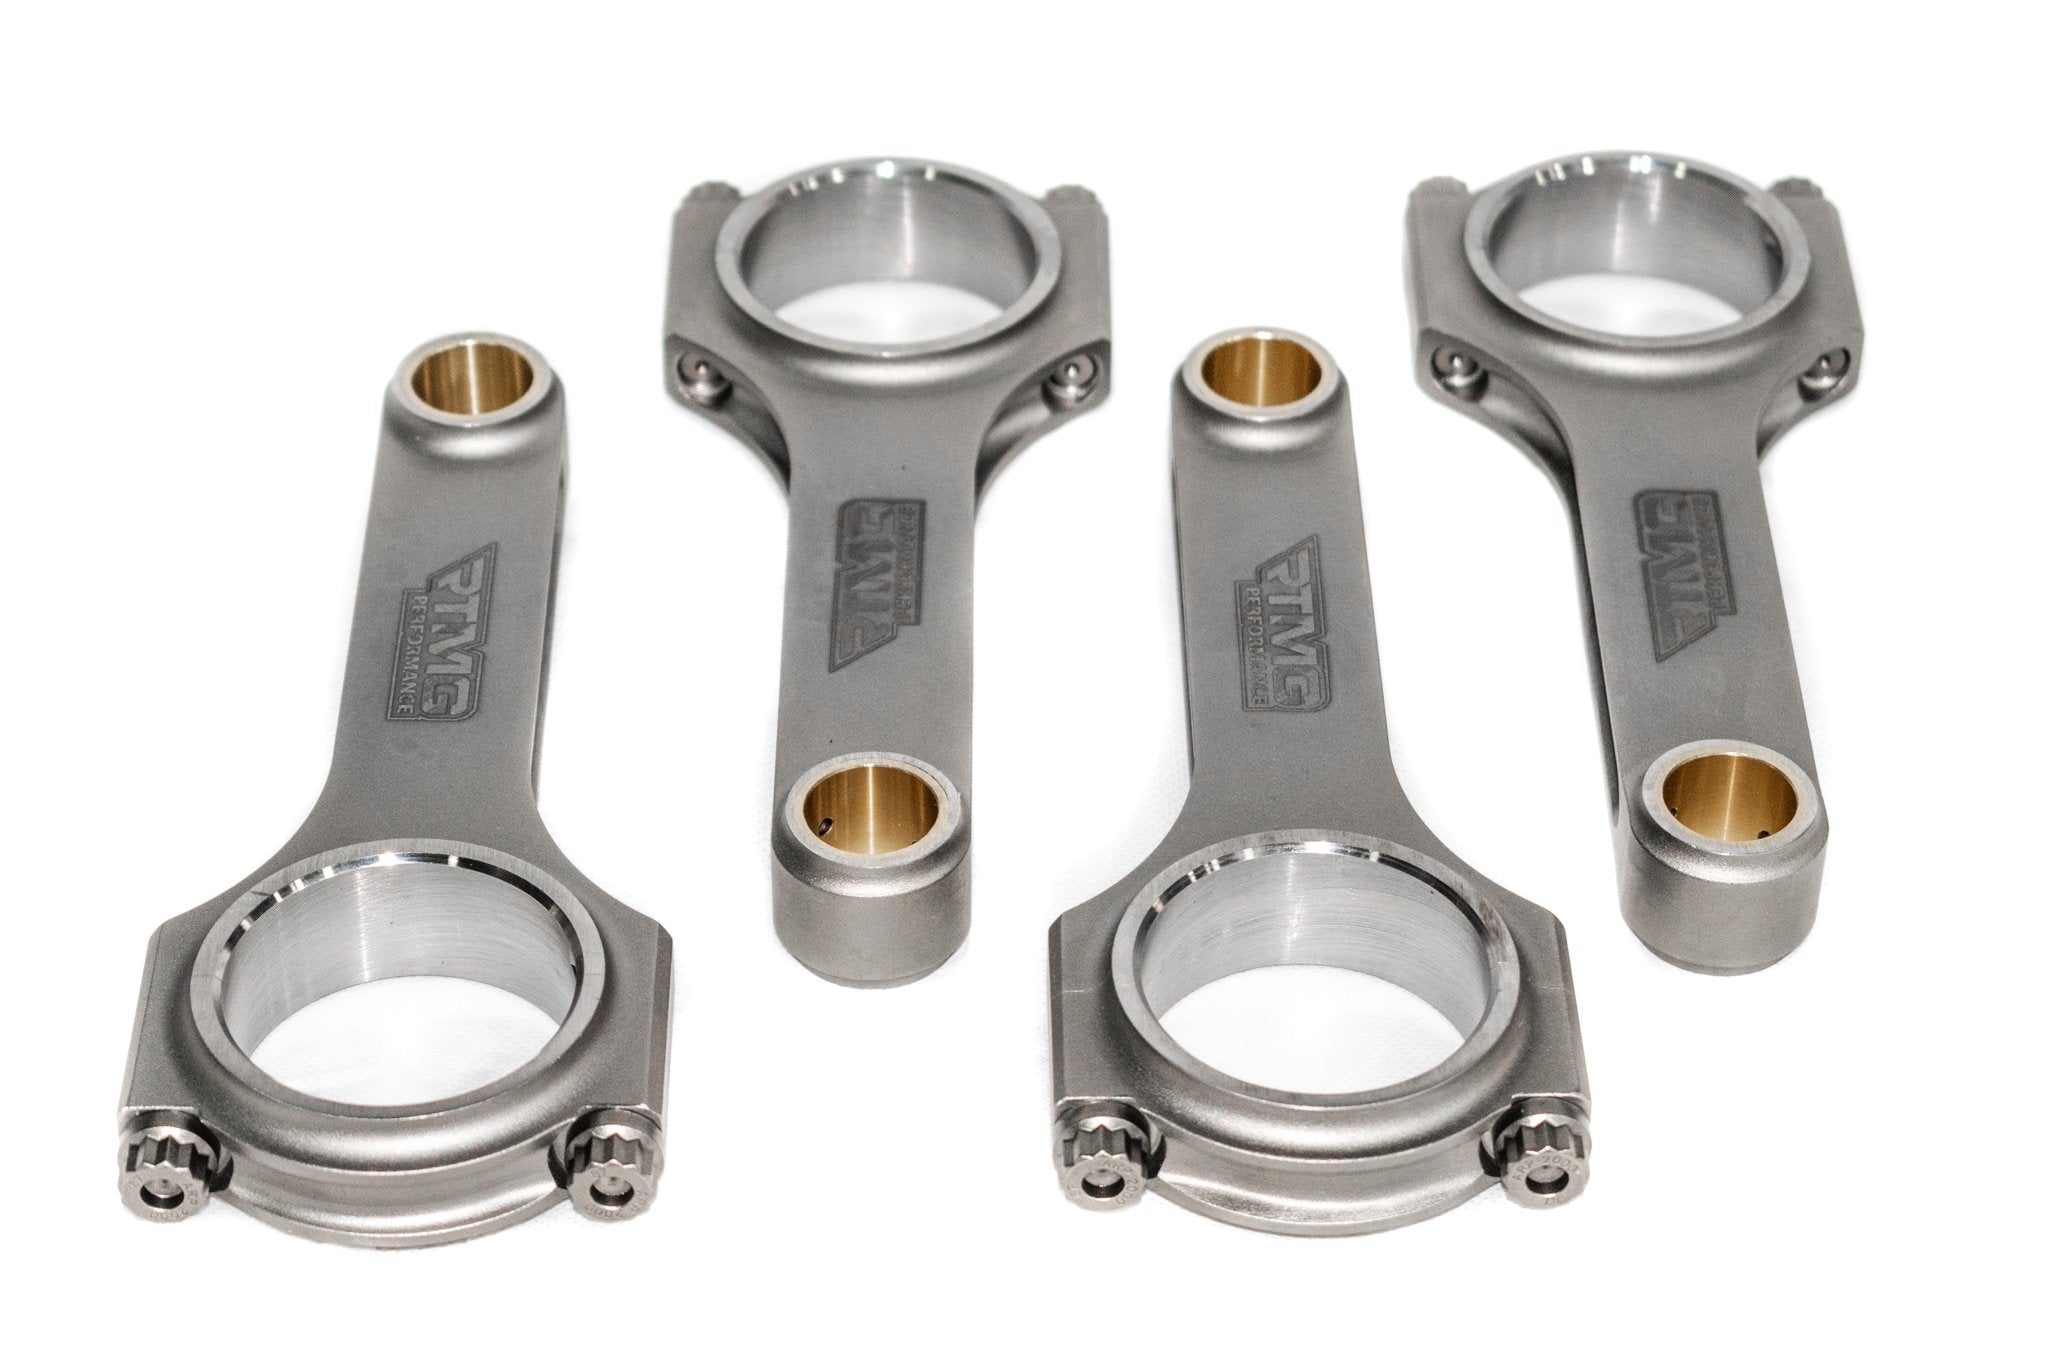 Connecting Rods Set for 1.8 TSI EA888 - Up to 600HP - RTMG Performance